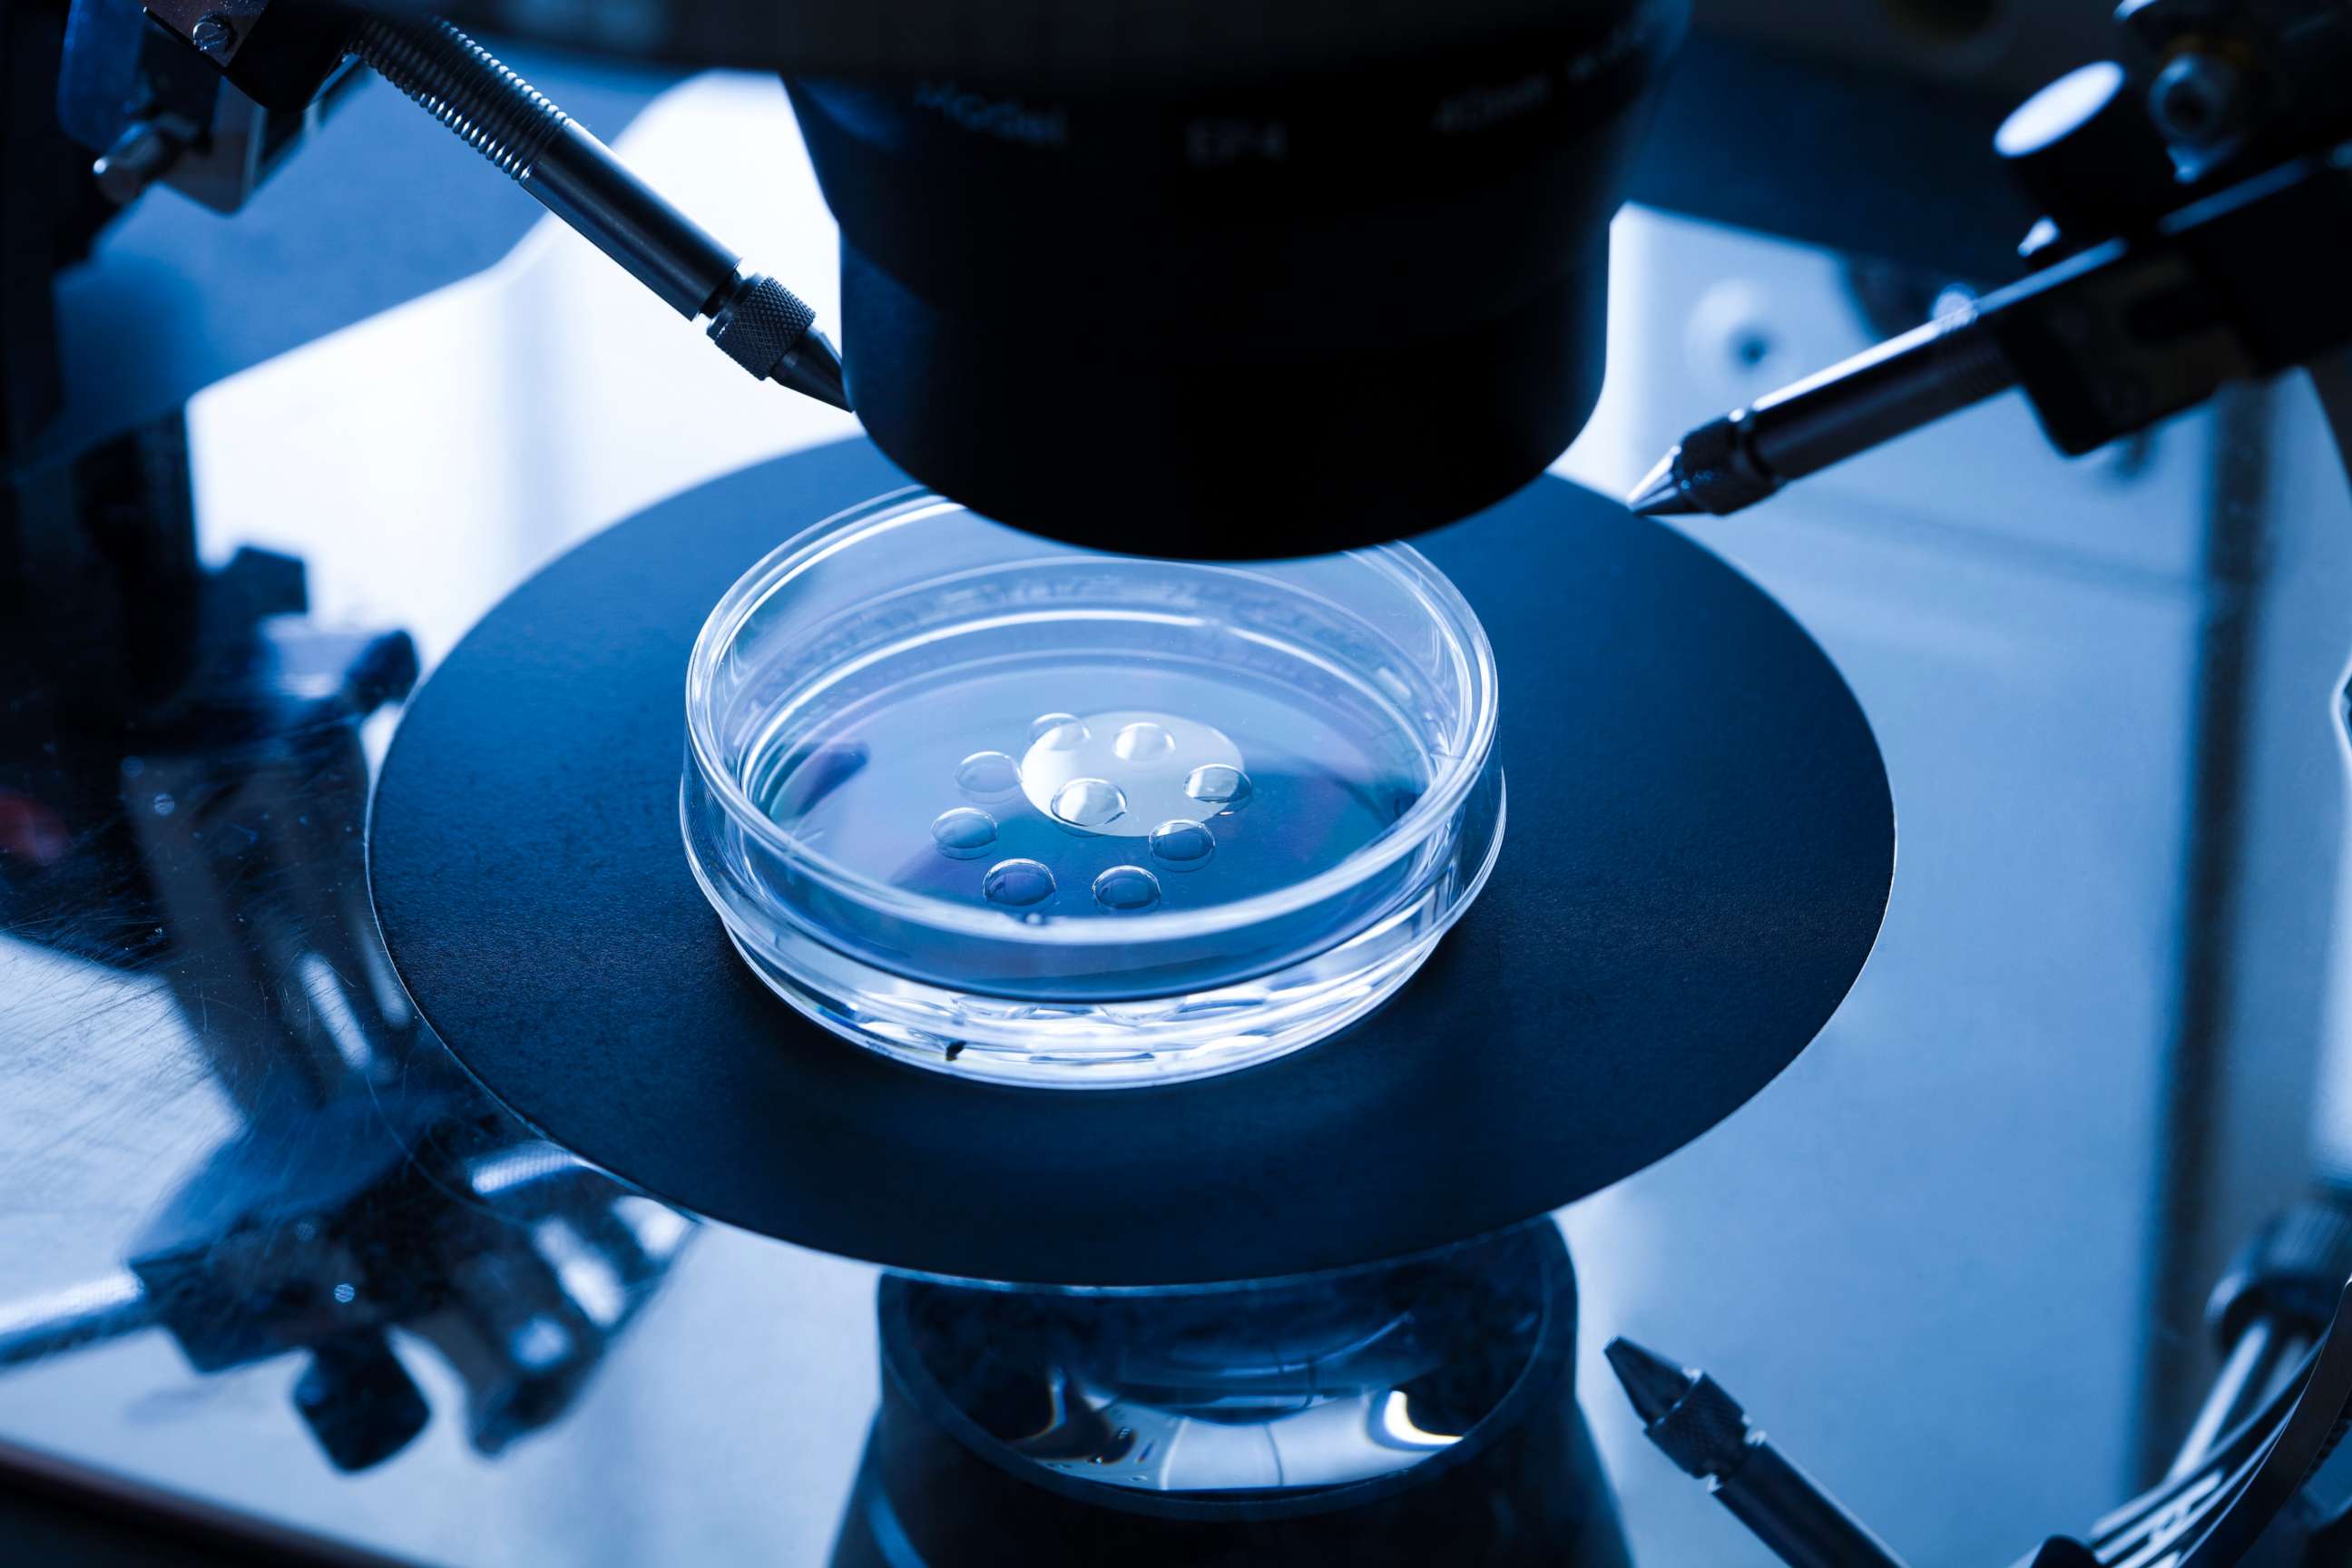 PHOTO: An embryo culture dish used for in vitro fertilisation is pictured in an undated stock photo.